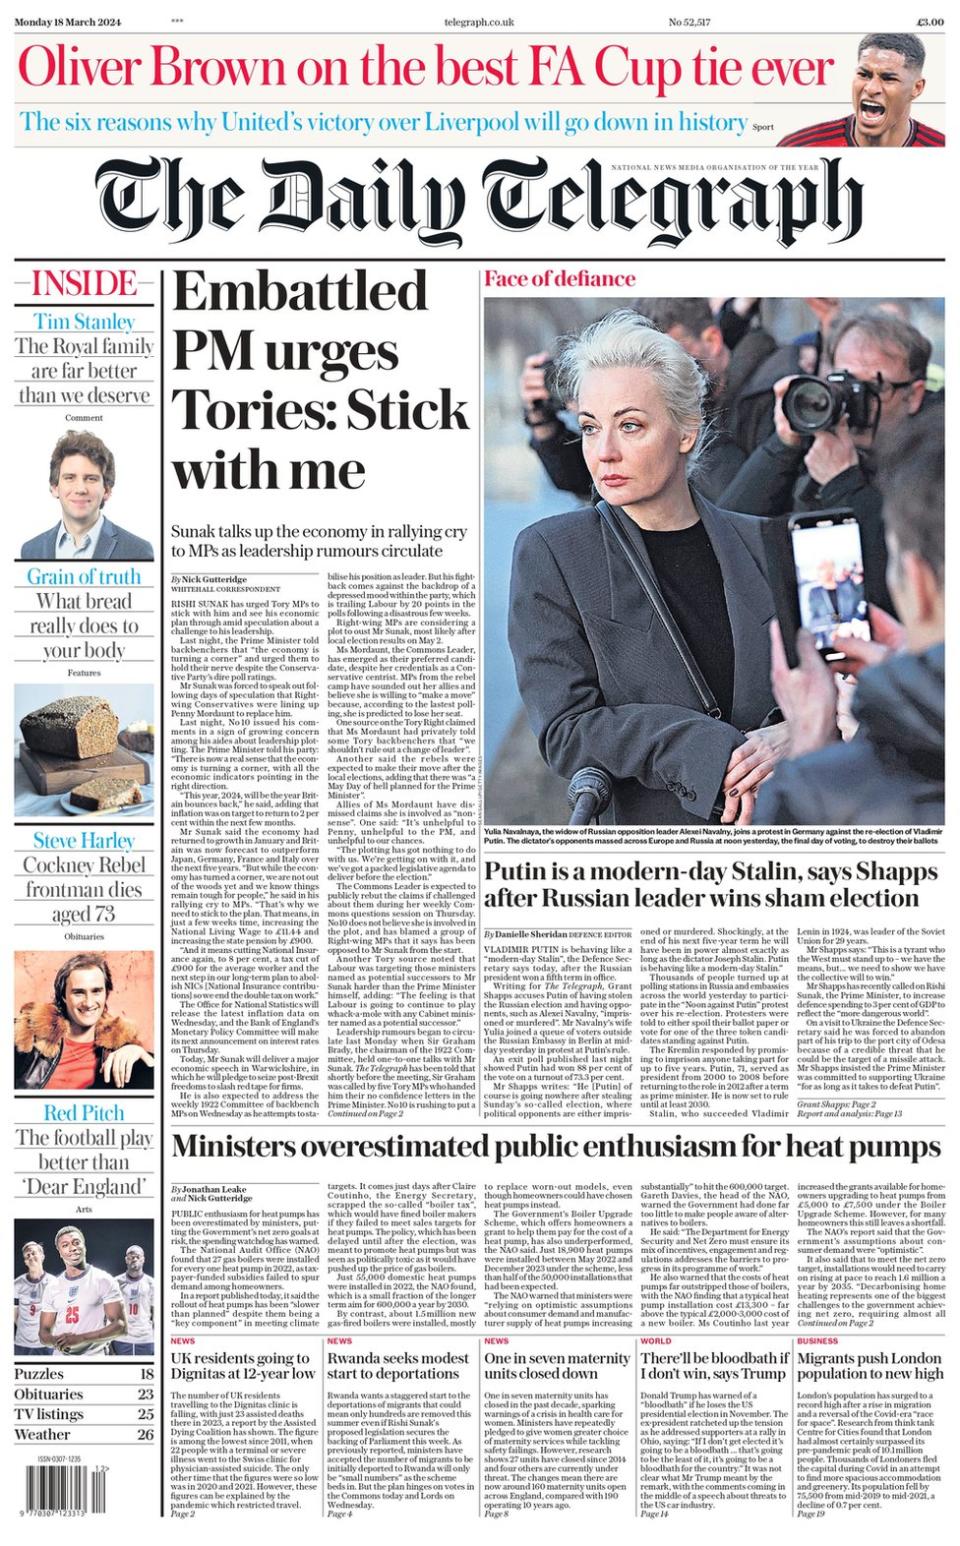 Daily Telegraph: Embattled Prime Minister urges Tories to stand with me